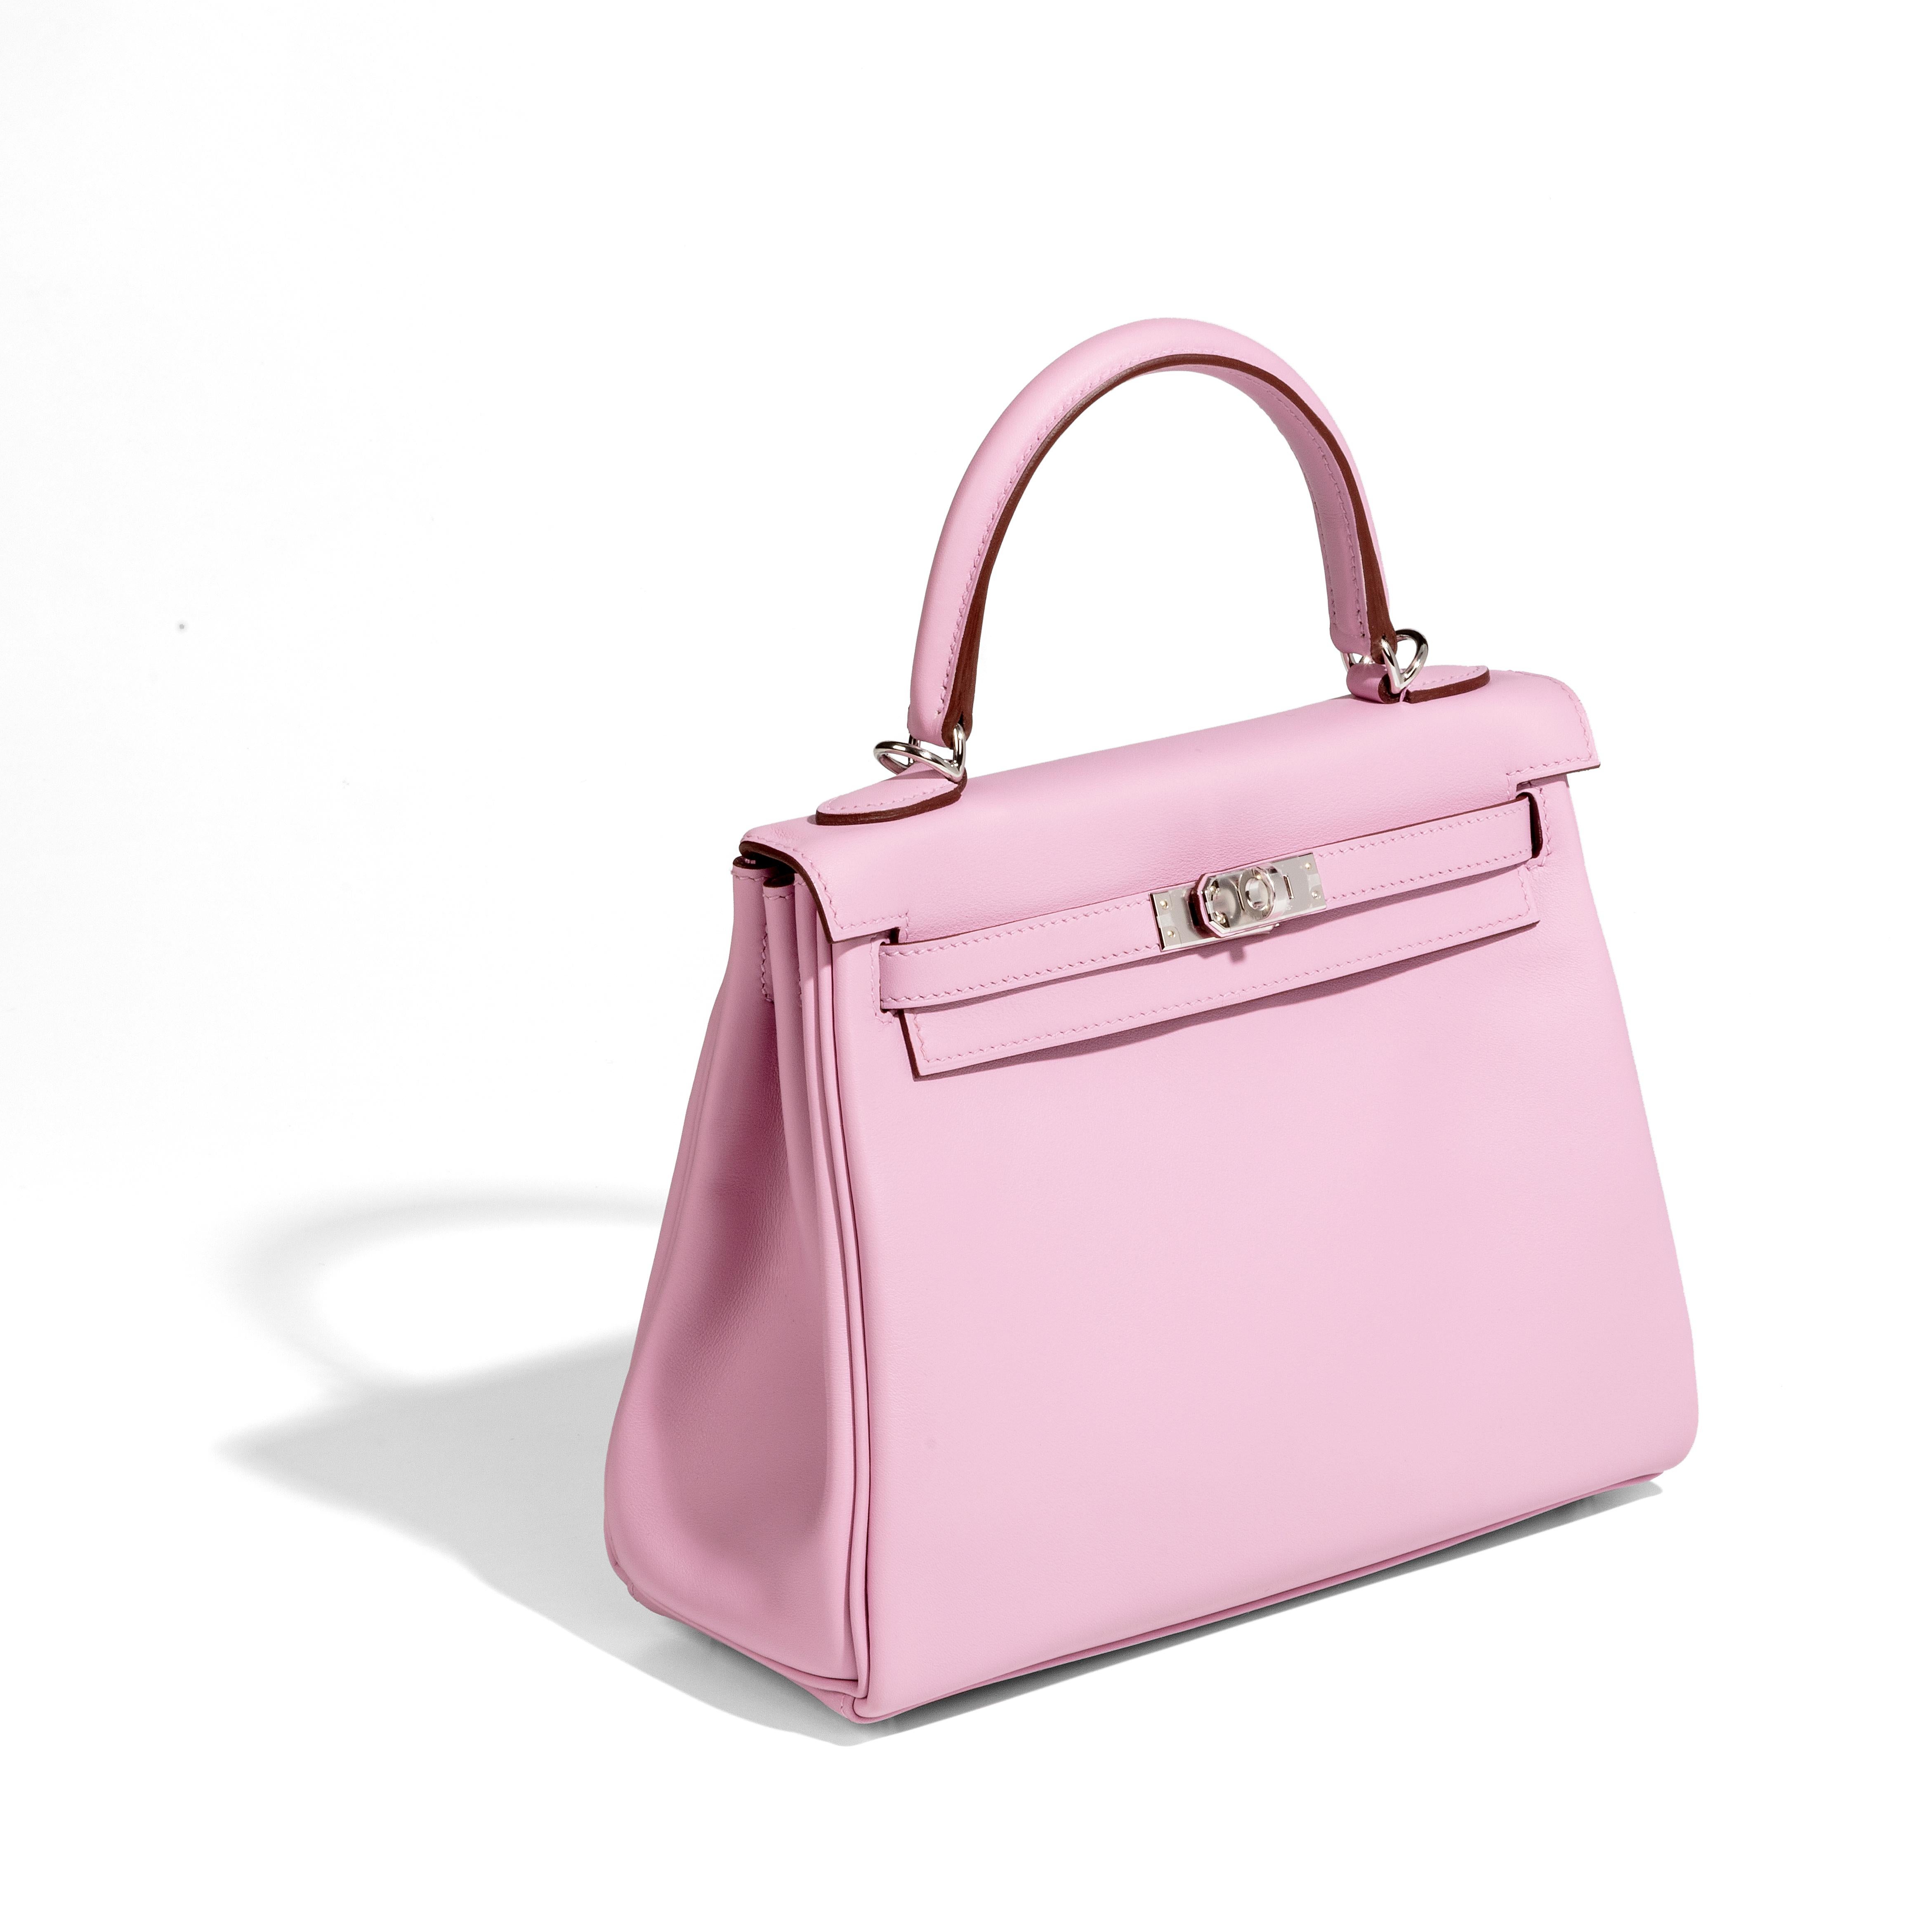 A true testament to the quality of the house's craftsmanship, this pre-owned Hermes Kelly 25 excludes timeless style and elegance. Crafted from smooth Veau Swift Leather in Mauve Sylvestre this piece is a sophisticated statement perfect for styling